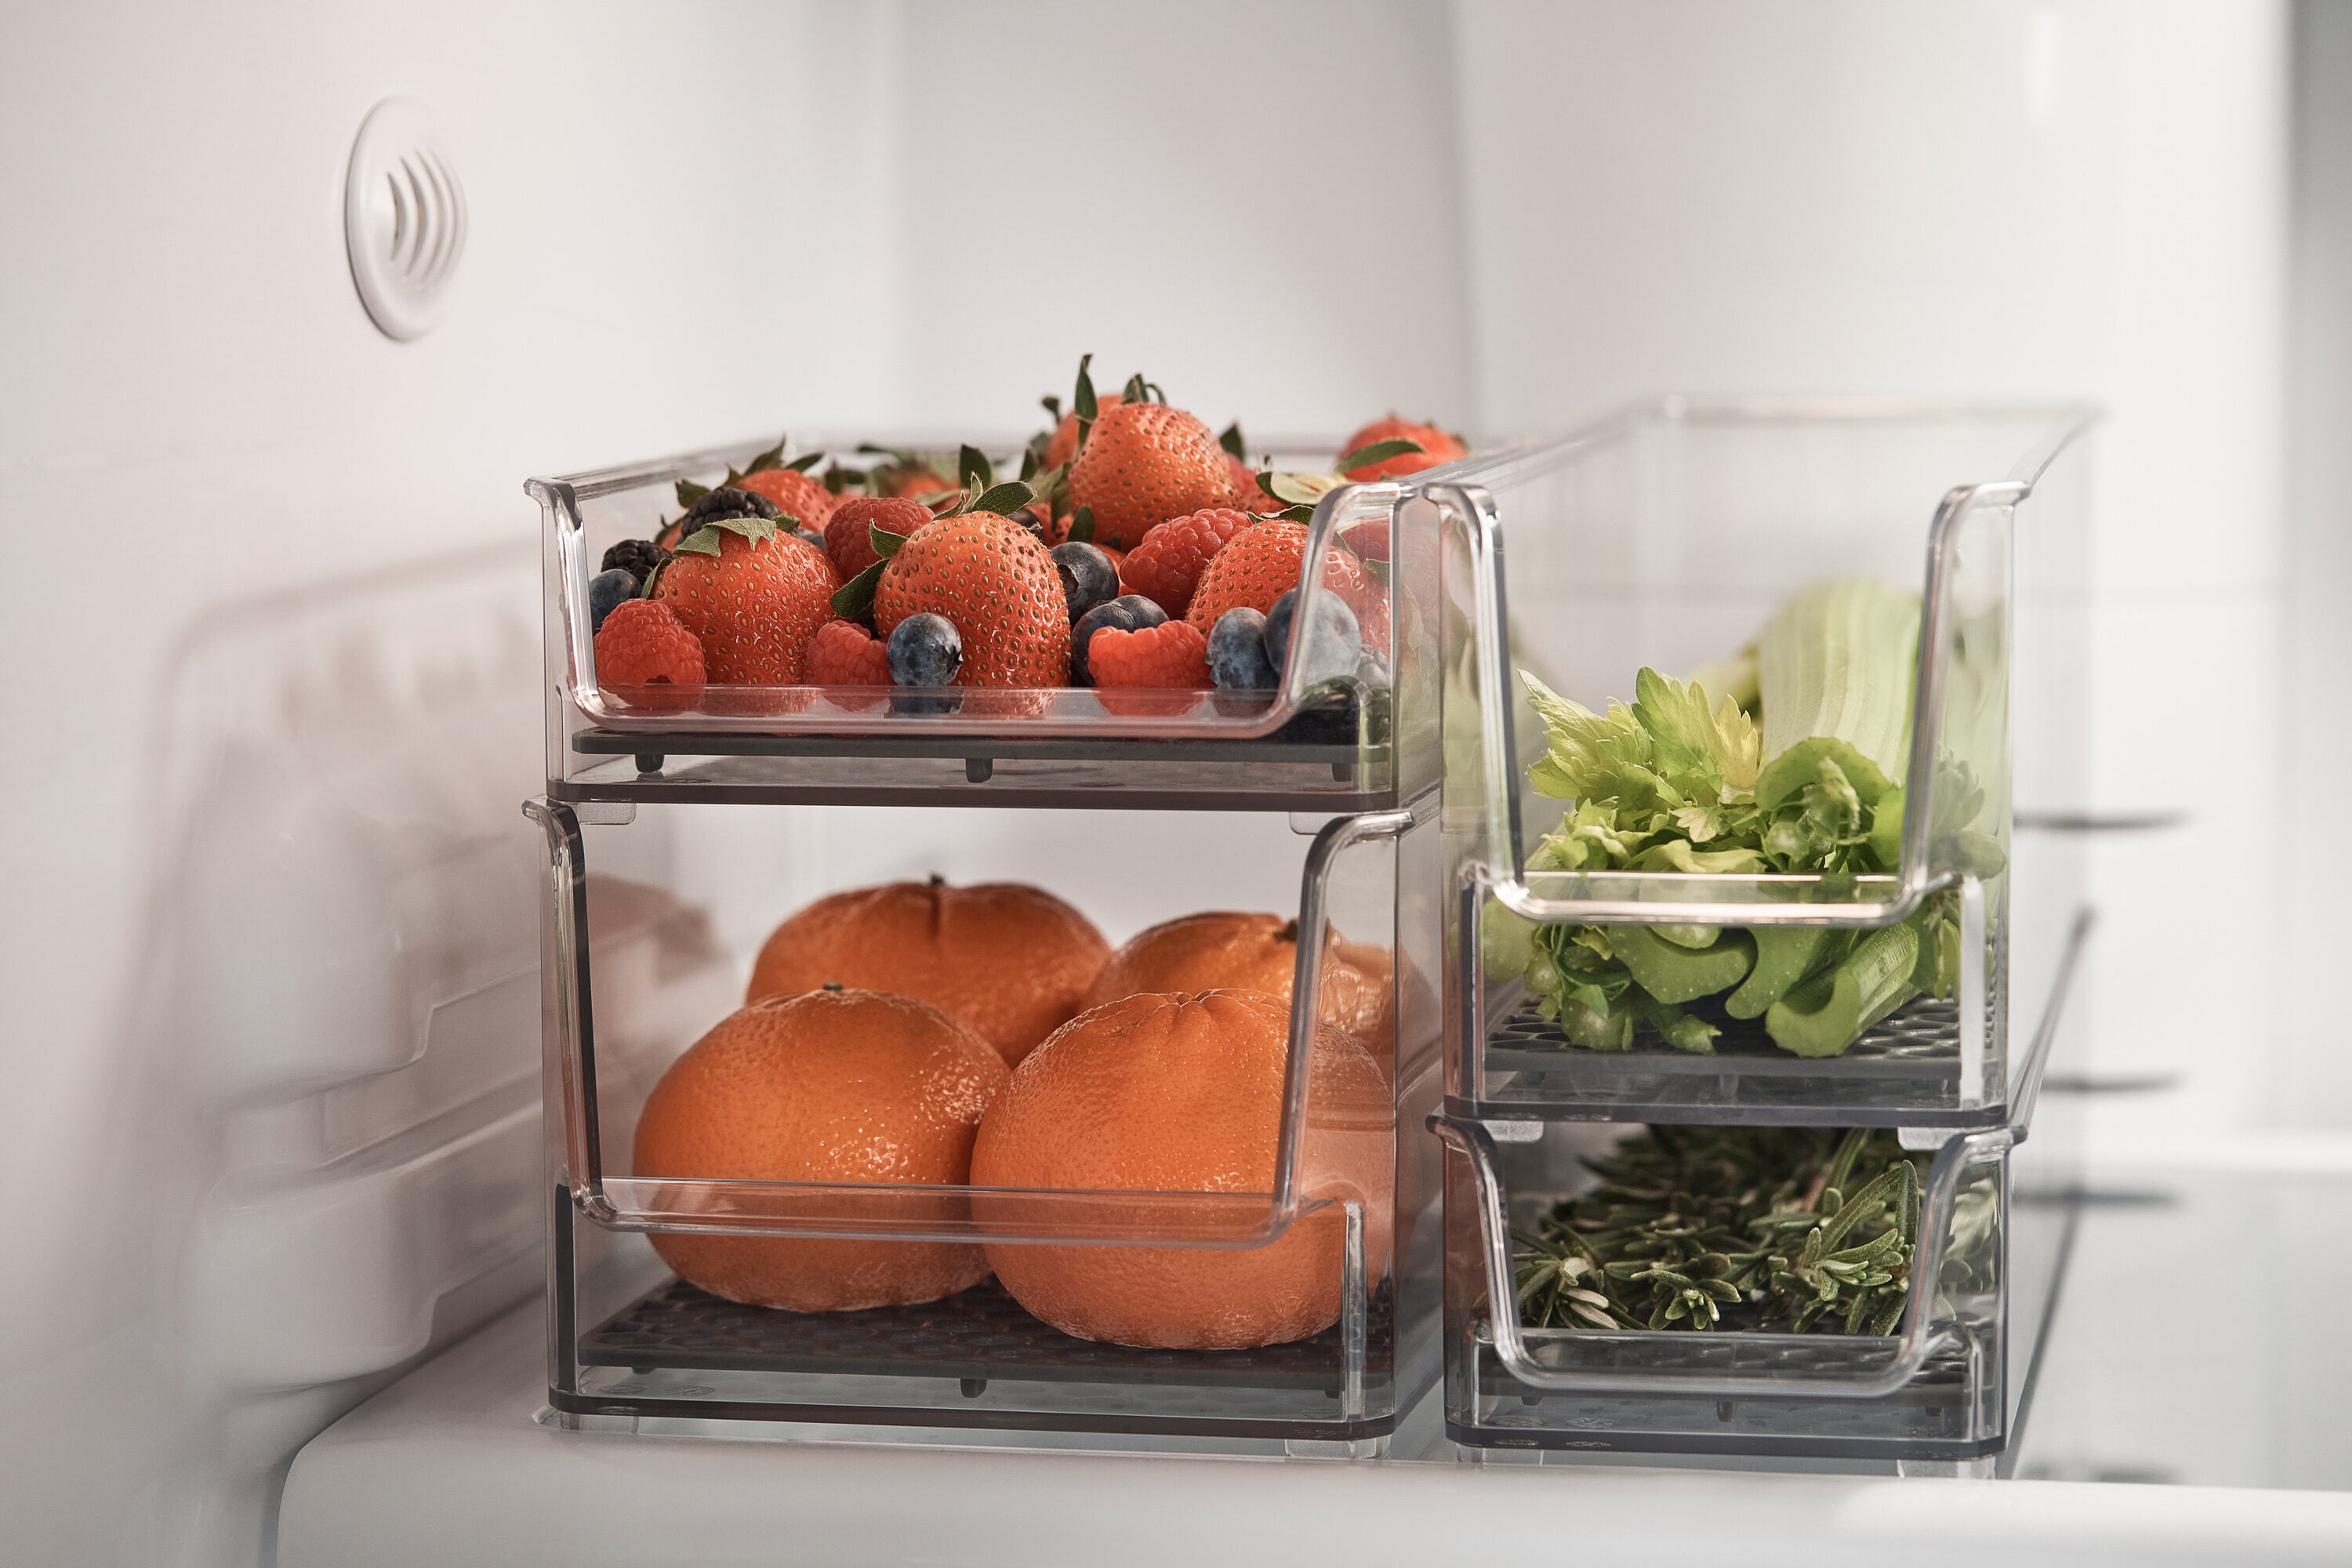  SANNO Vegetable Fruit Storage Containers, Refrigerator